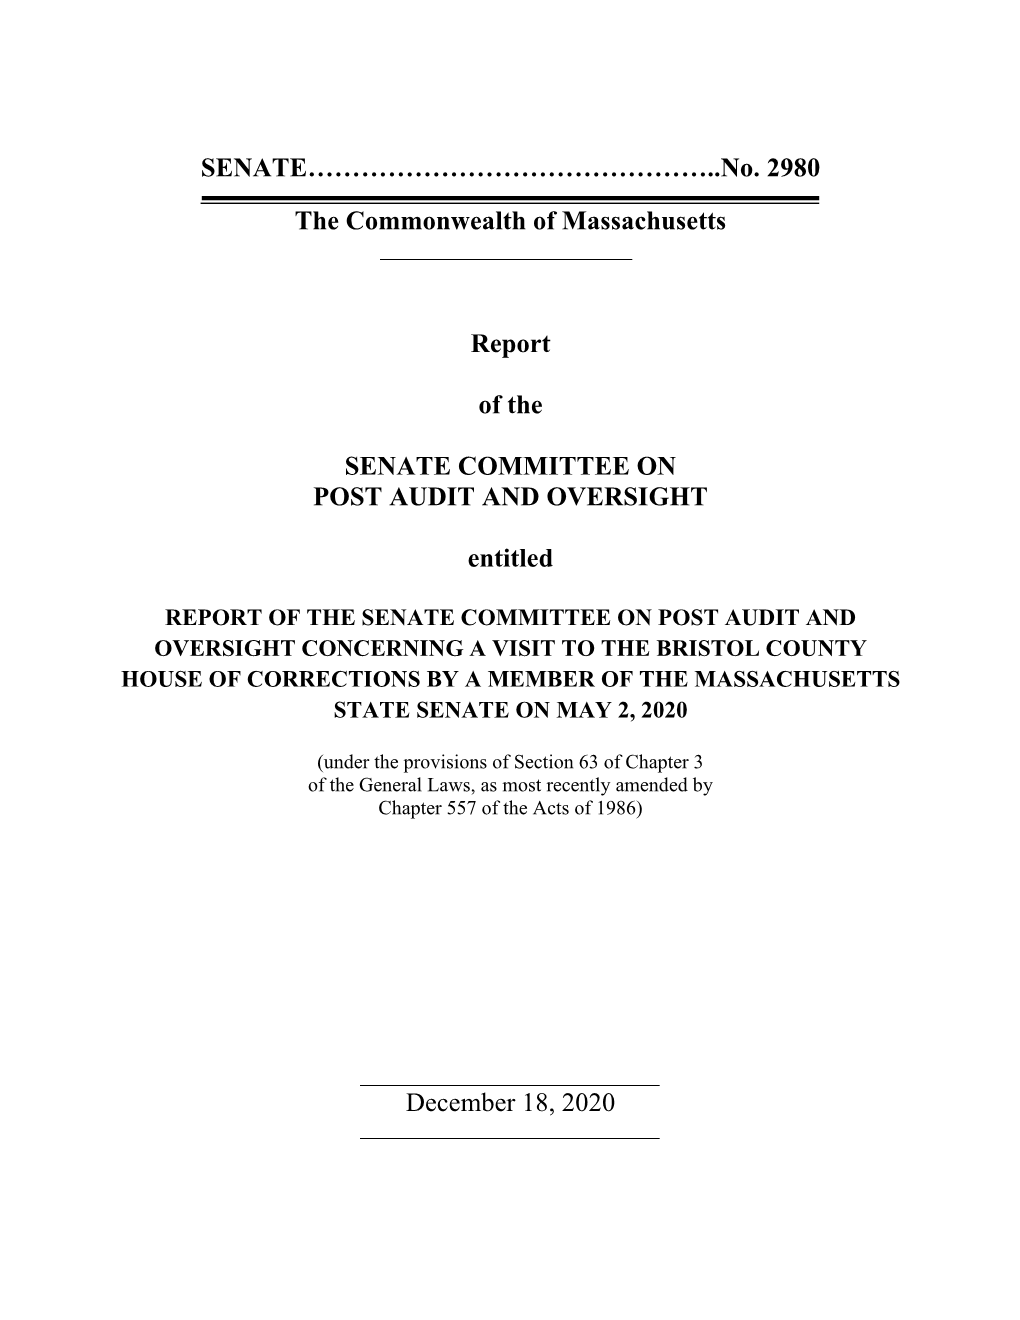 Report of the Senate Committee on Post Audit